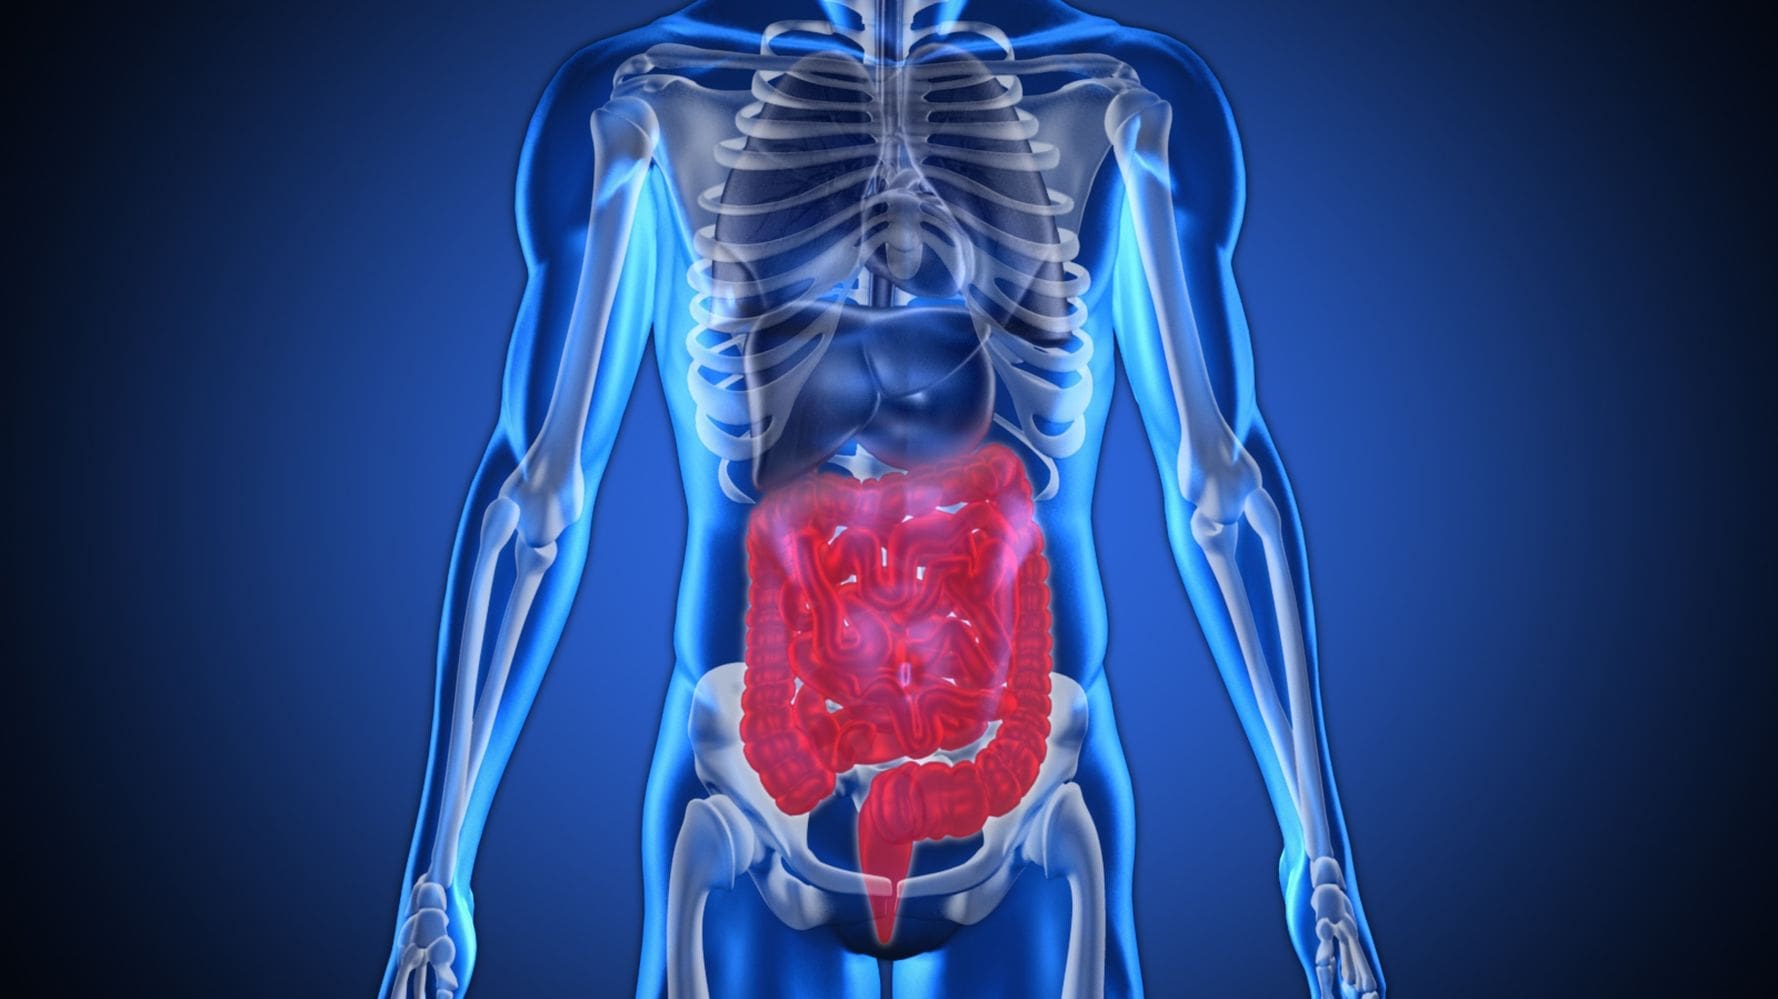 Colon Cleanse Benefits: What the Research Says